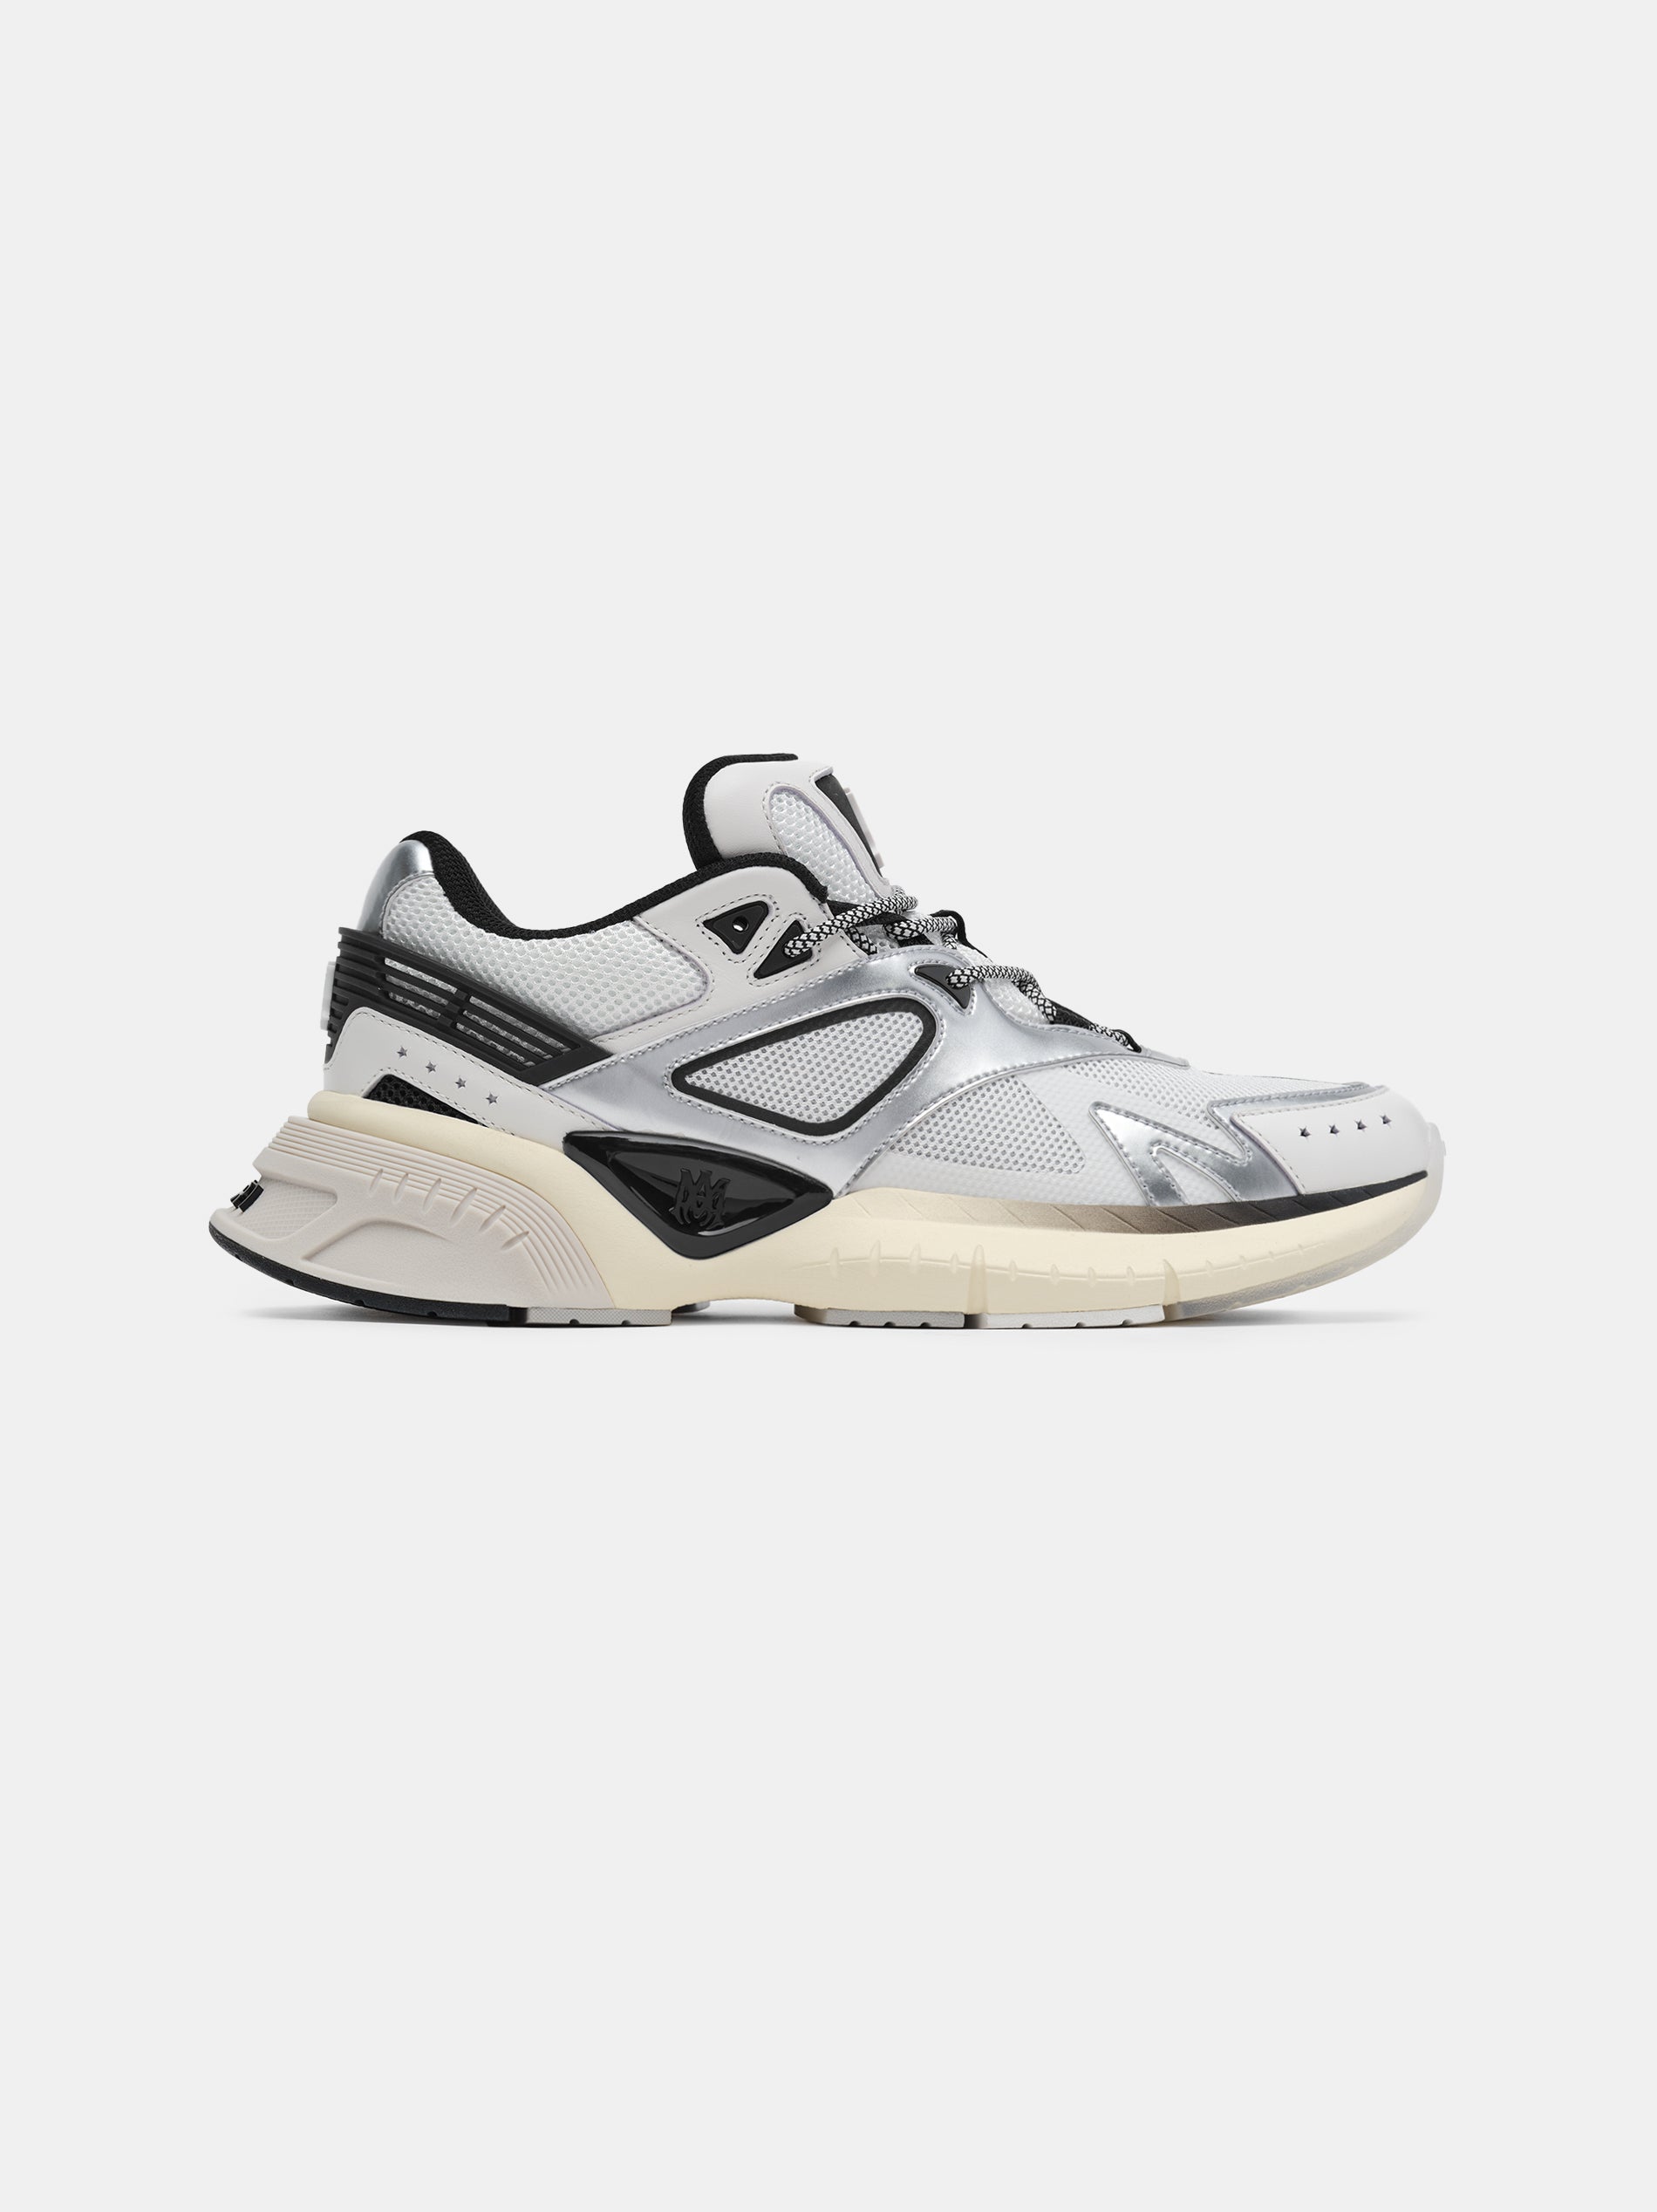 Product WOMEN - WOMEN'S MA RUNNER - Black White Silver featured image